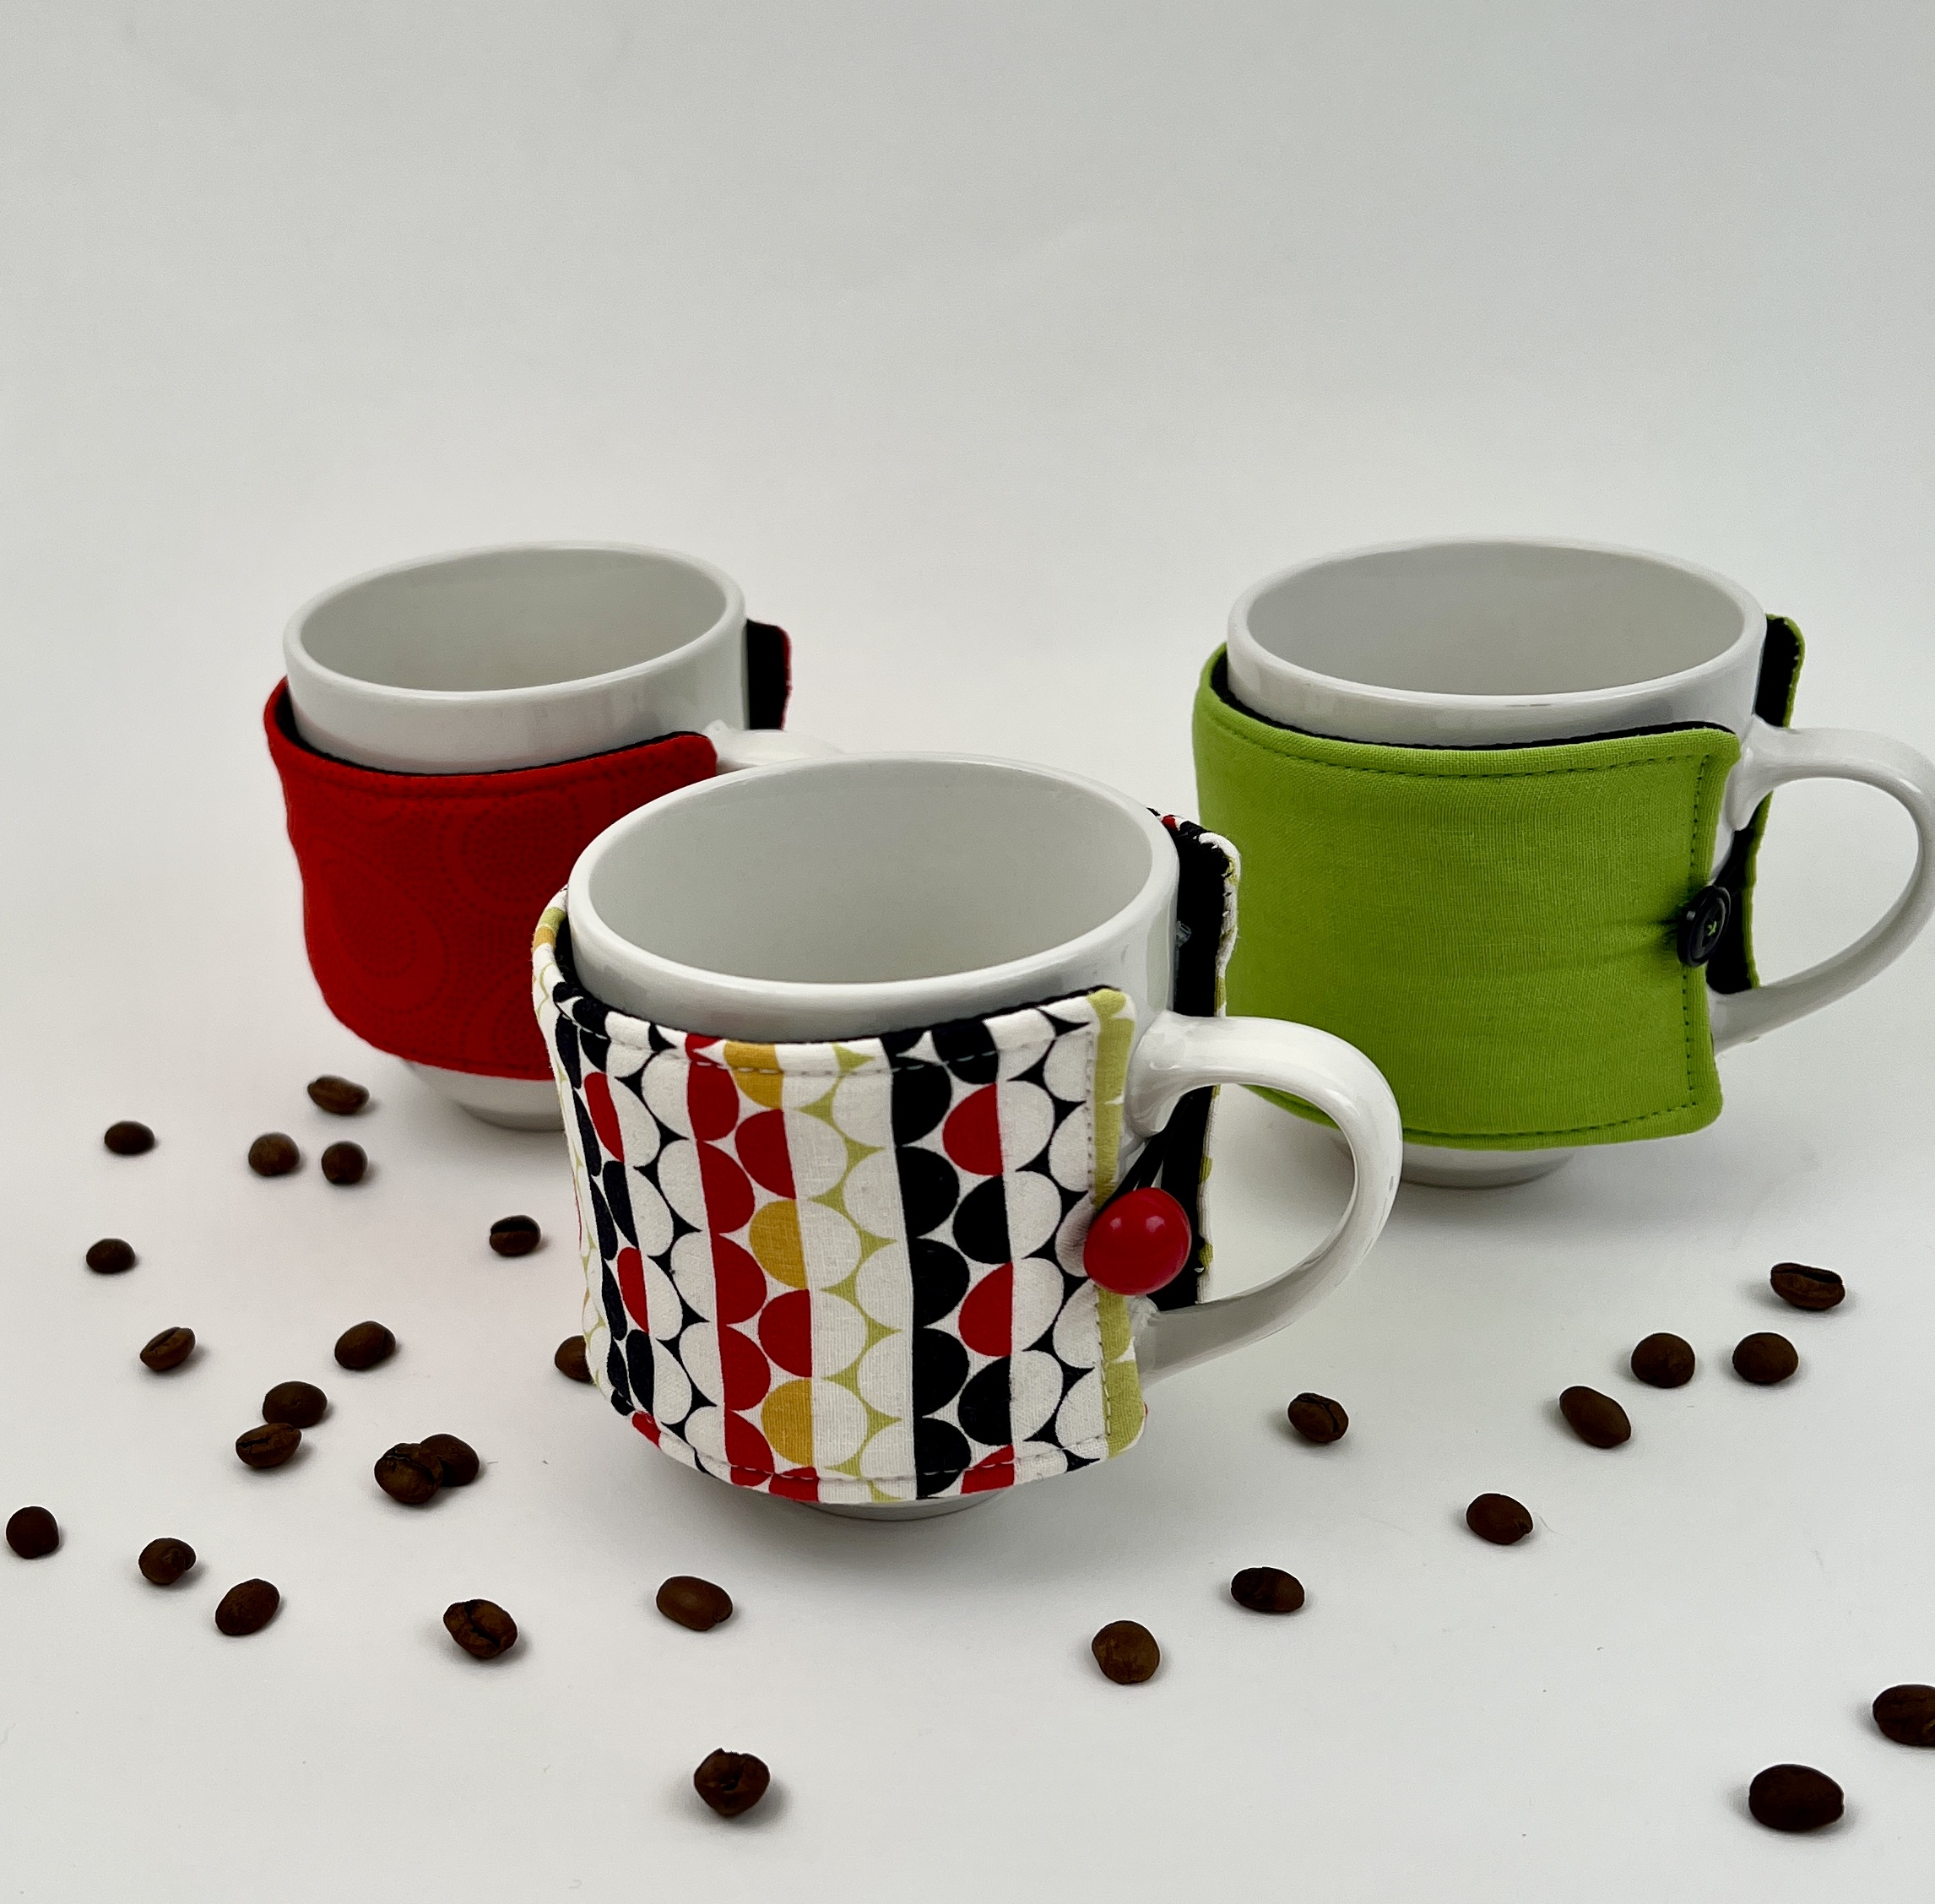 3 mugs with sewn fabric cozies and buttons on a white table with coffee beans scattered around them